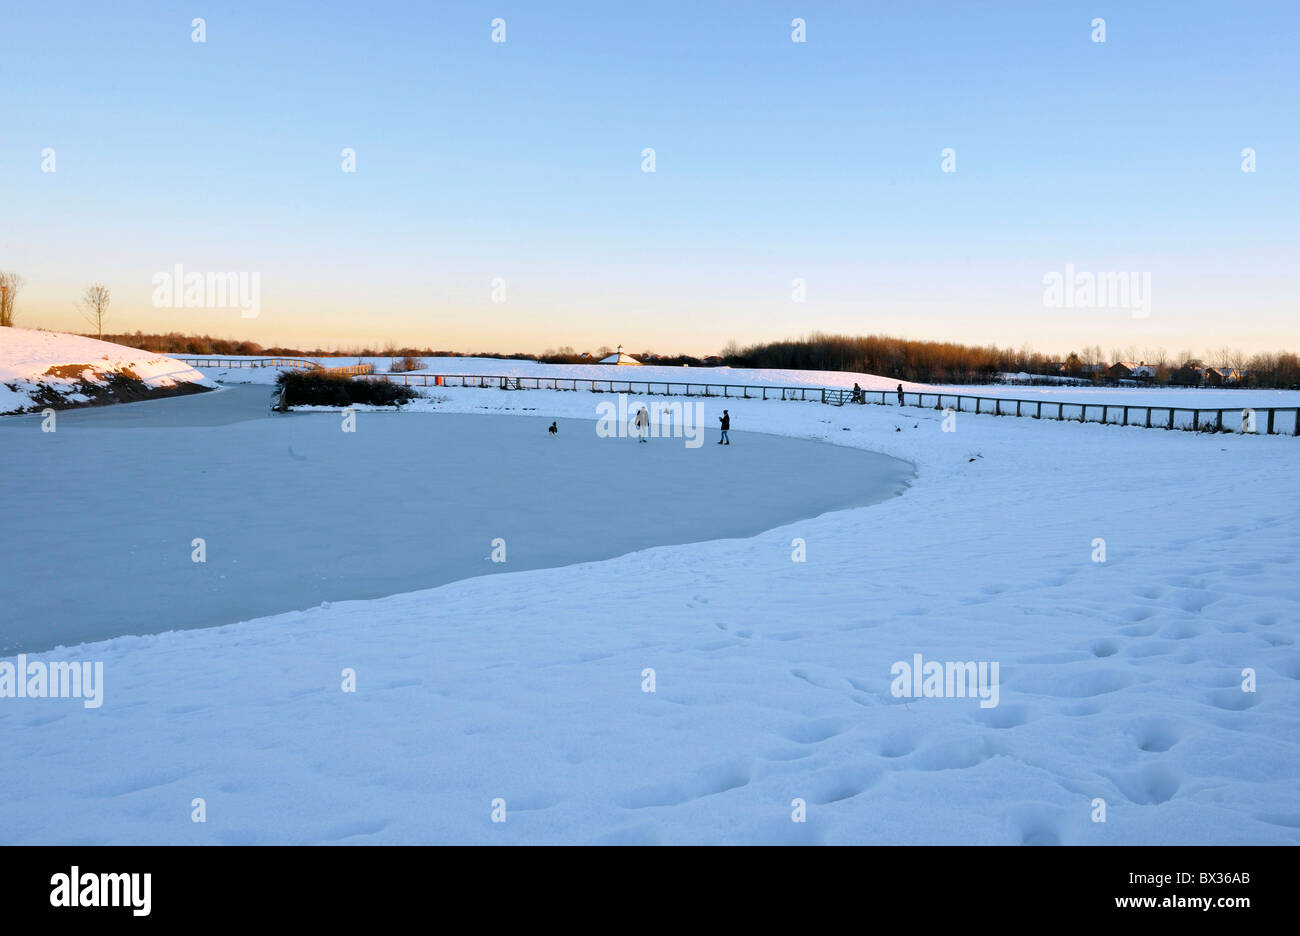 Ignoring KEEP OFF THIN ICE signs. Two people risk walking out onto the ice IN A PUBLIC PARK. Stock Photo